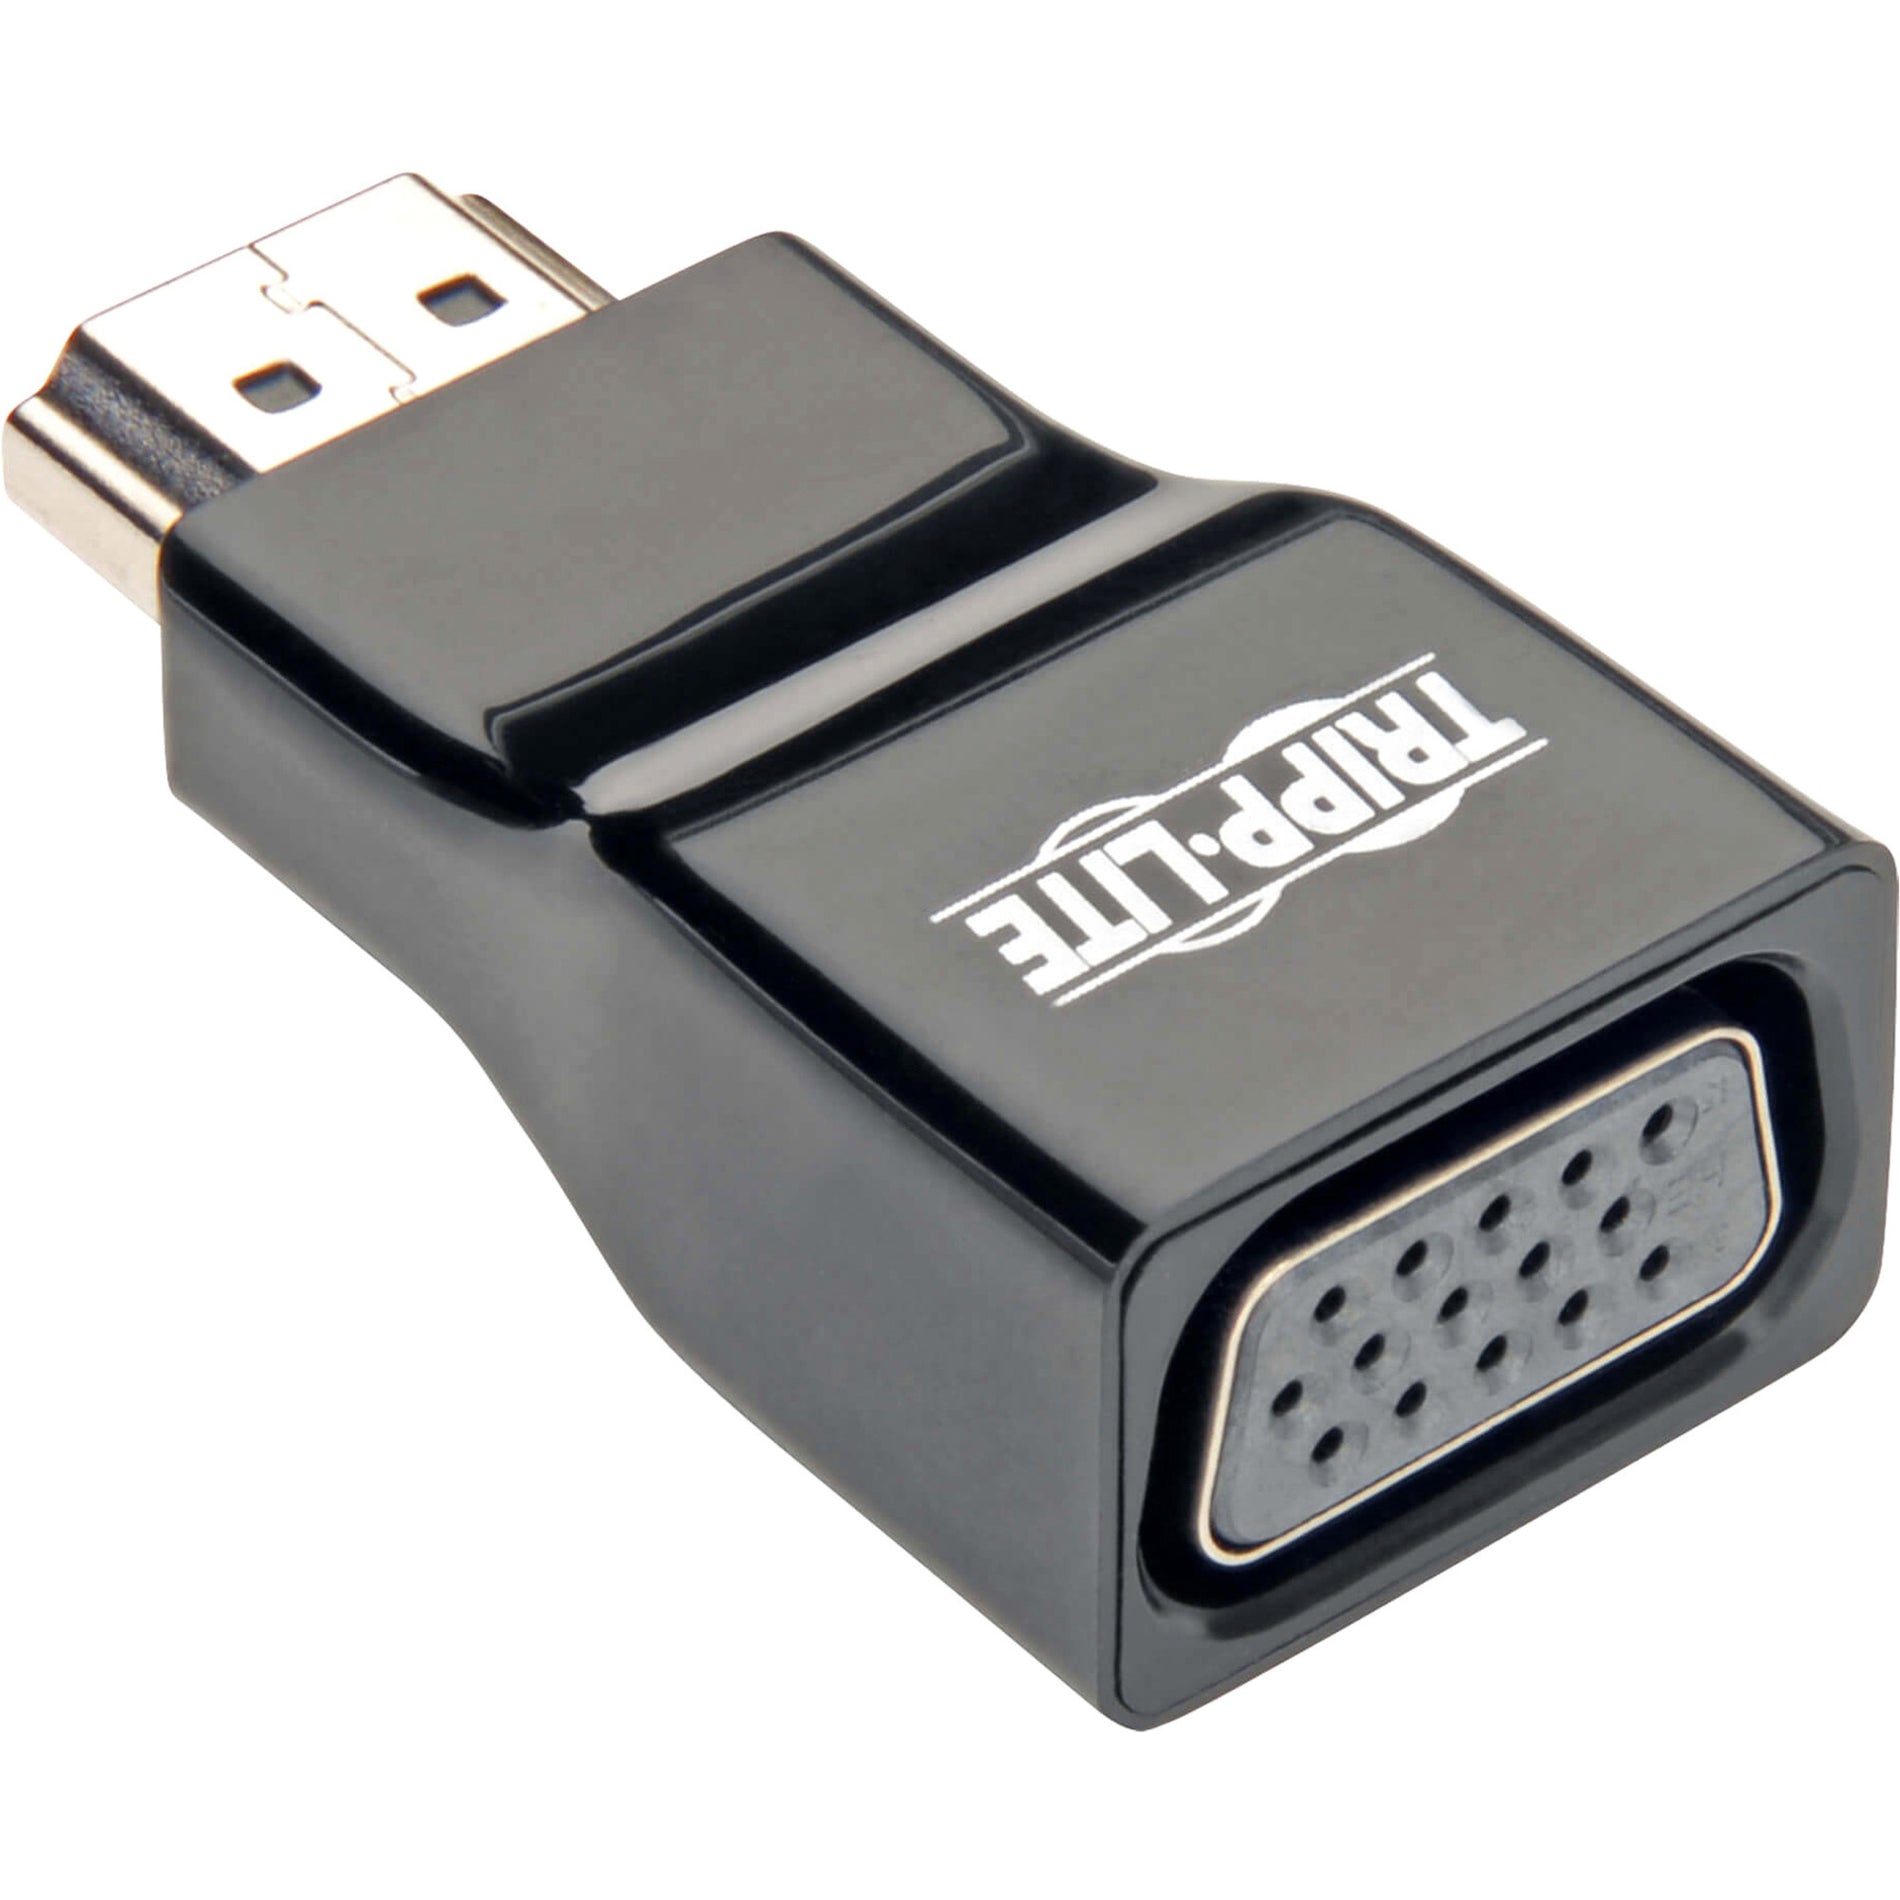 Tripp Lite P131-000 HDMI Male to VGA Female Adapter Video Converter, Supports 1920 x 1080 Resolution